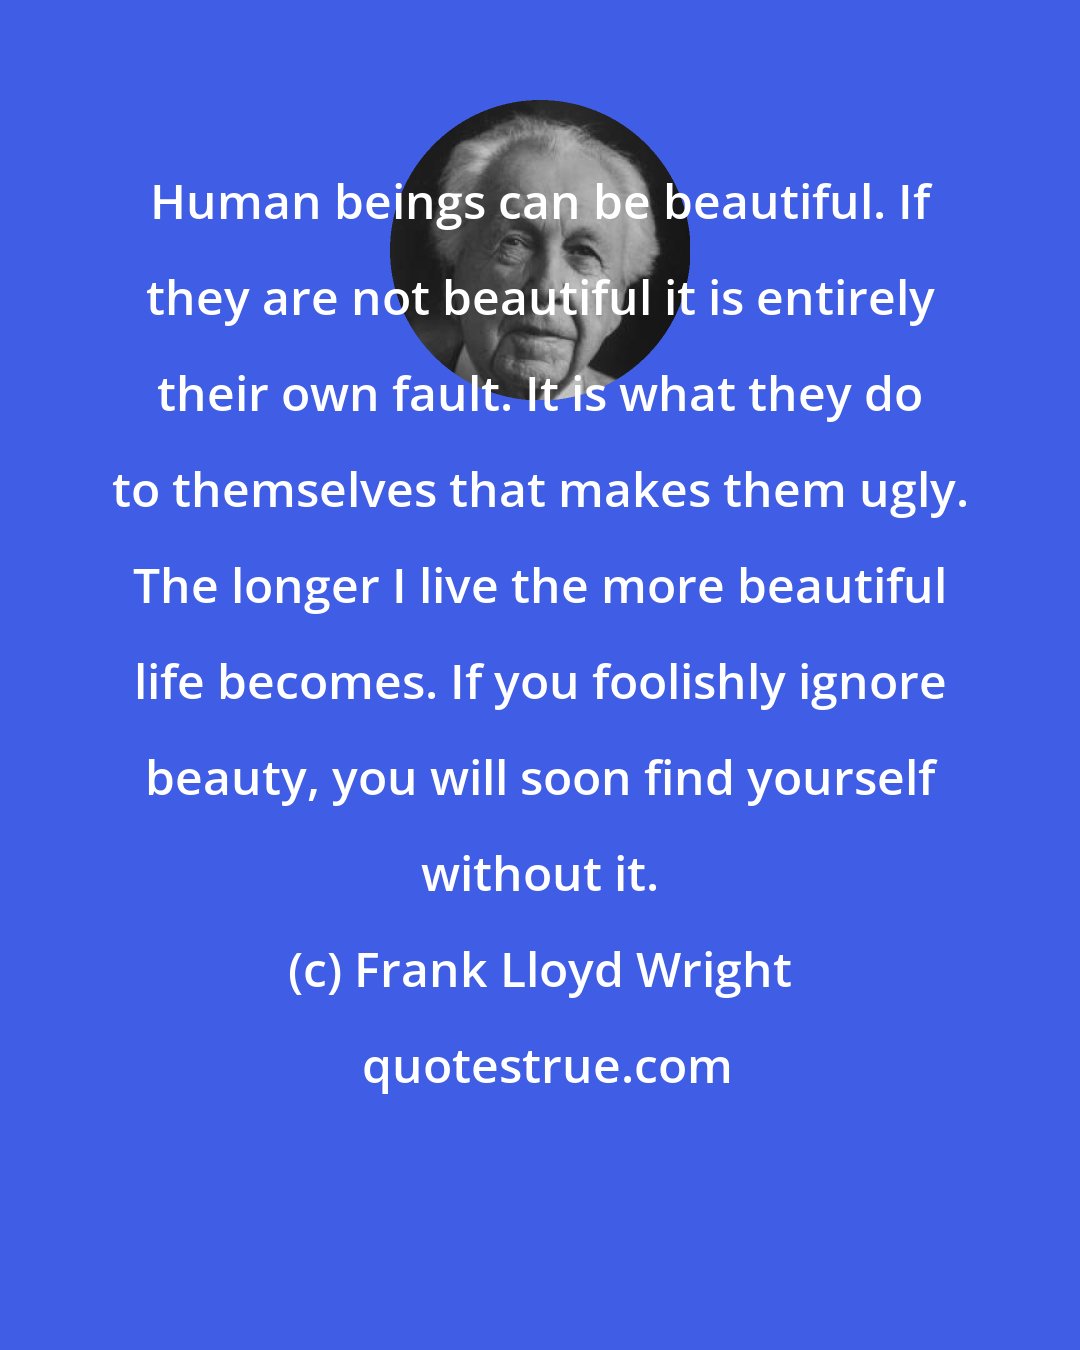 Frank Lloyd Wright: Human beings can be beautiful. If they are not beautiful it is entirely their own fault. It is what they do to themselves that makes them ugly. The longer I live the more beautiful life becomes. If you foolishly ignore beauty, you will soon find yourself without it.